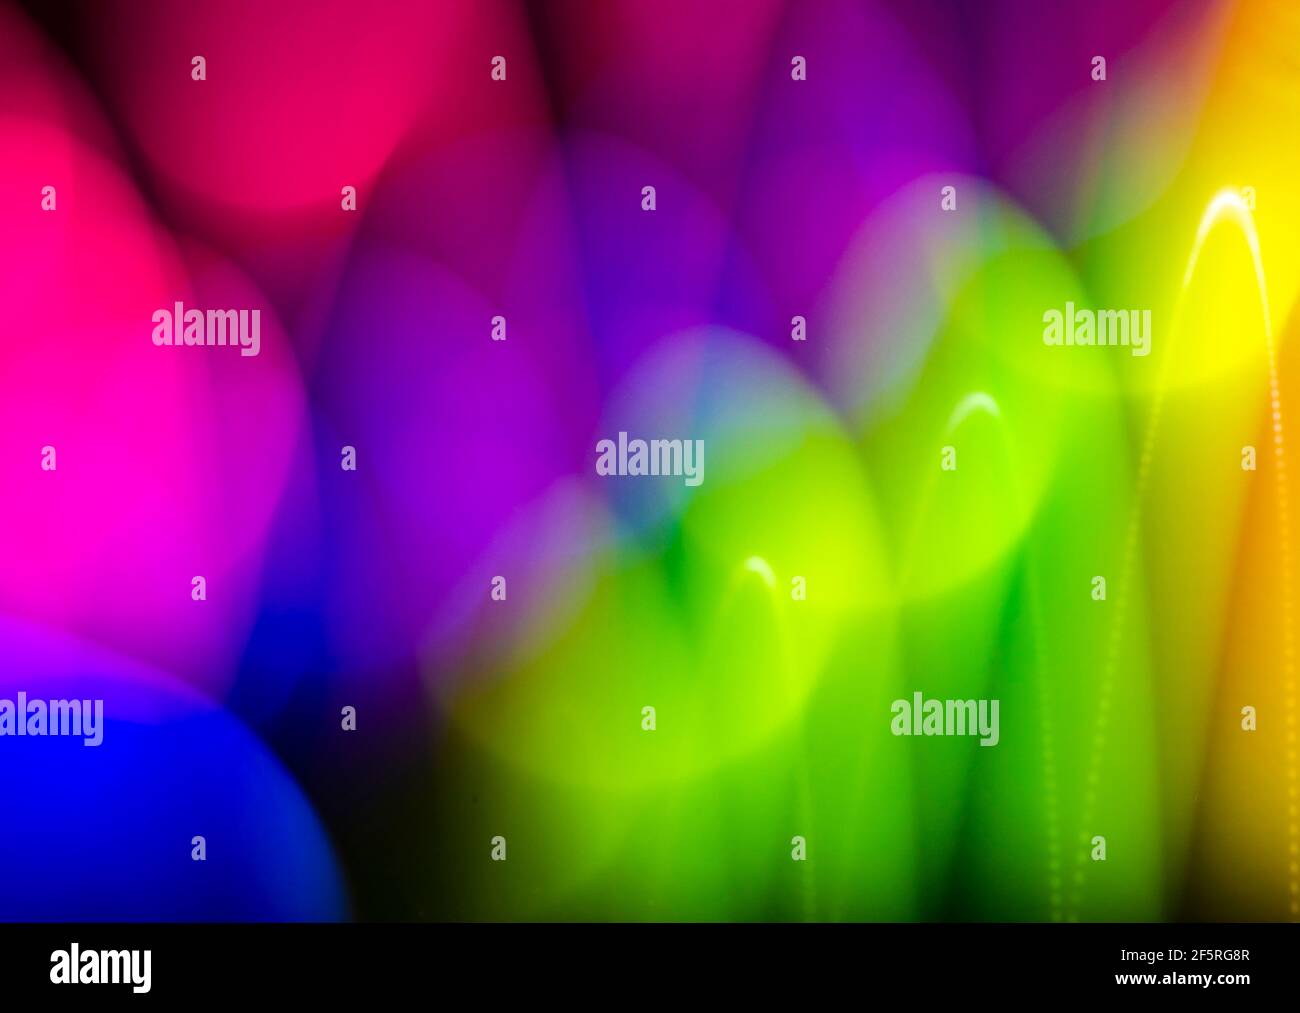 Glossy colorful Background. Light Painting with balls. Abstract Stock Photo